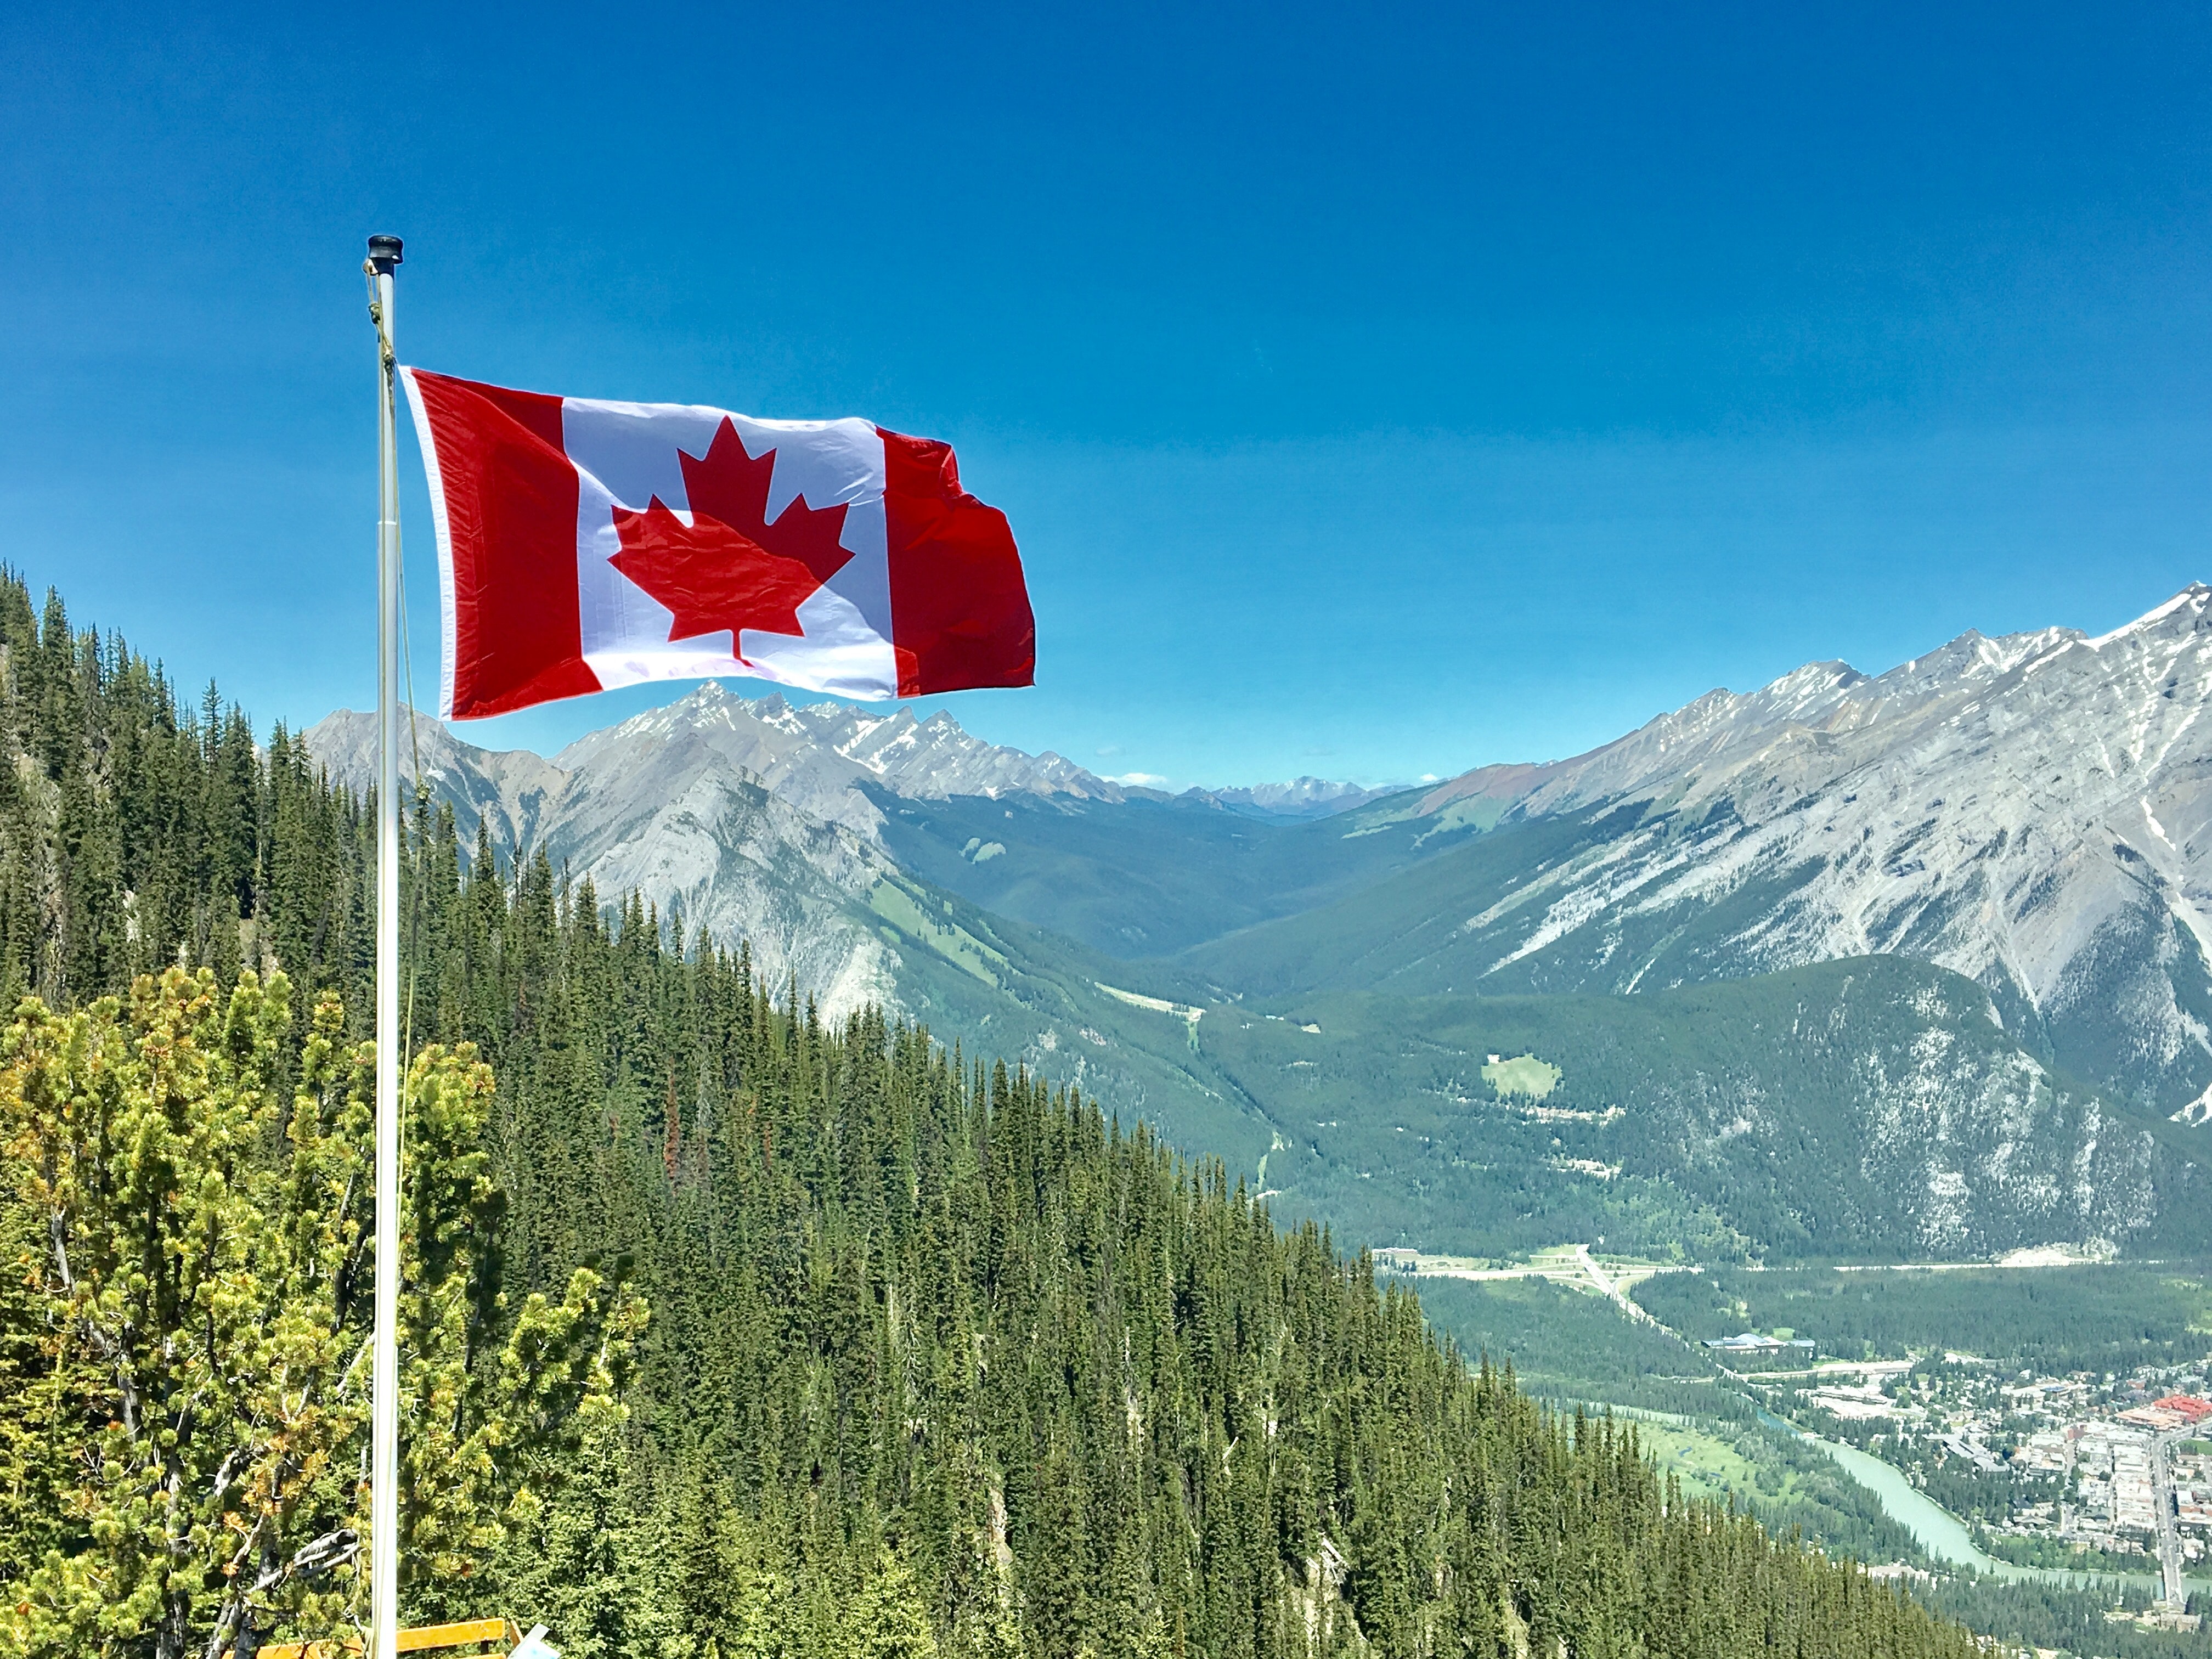 Image of Canadian flag flying with mountains in background